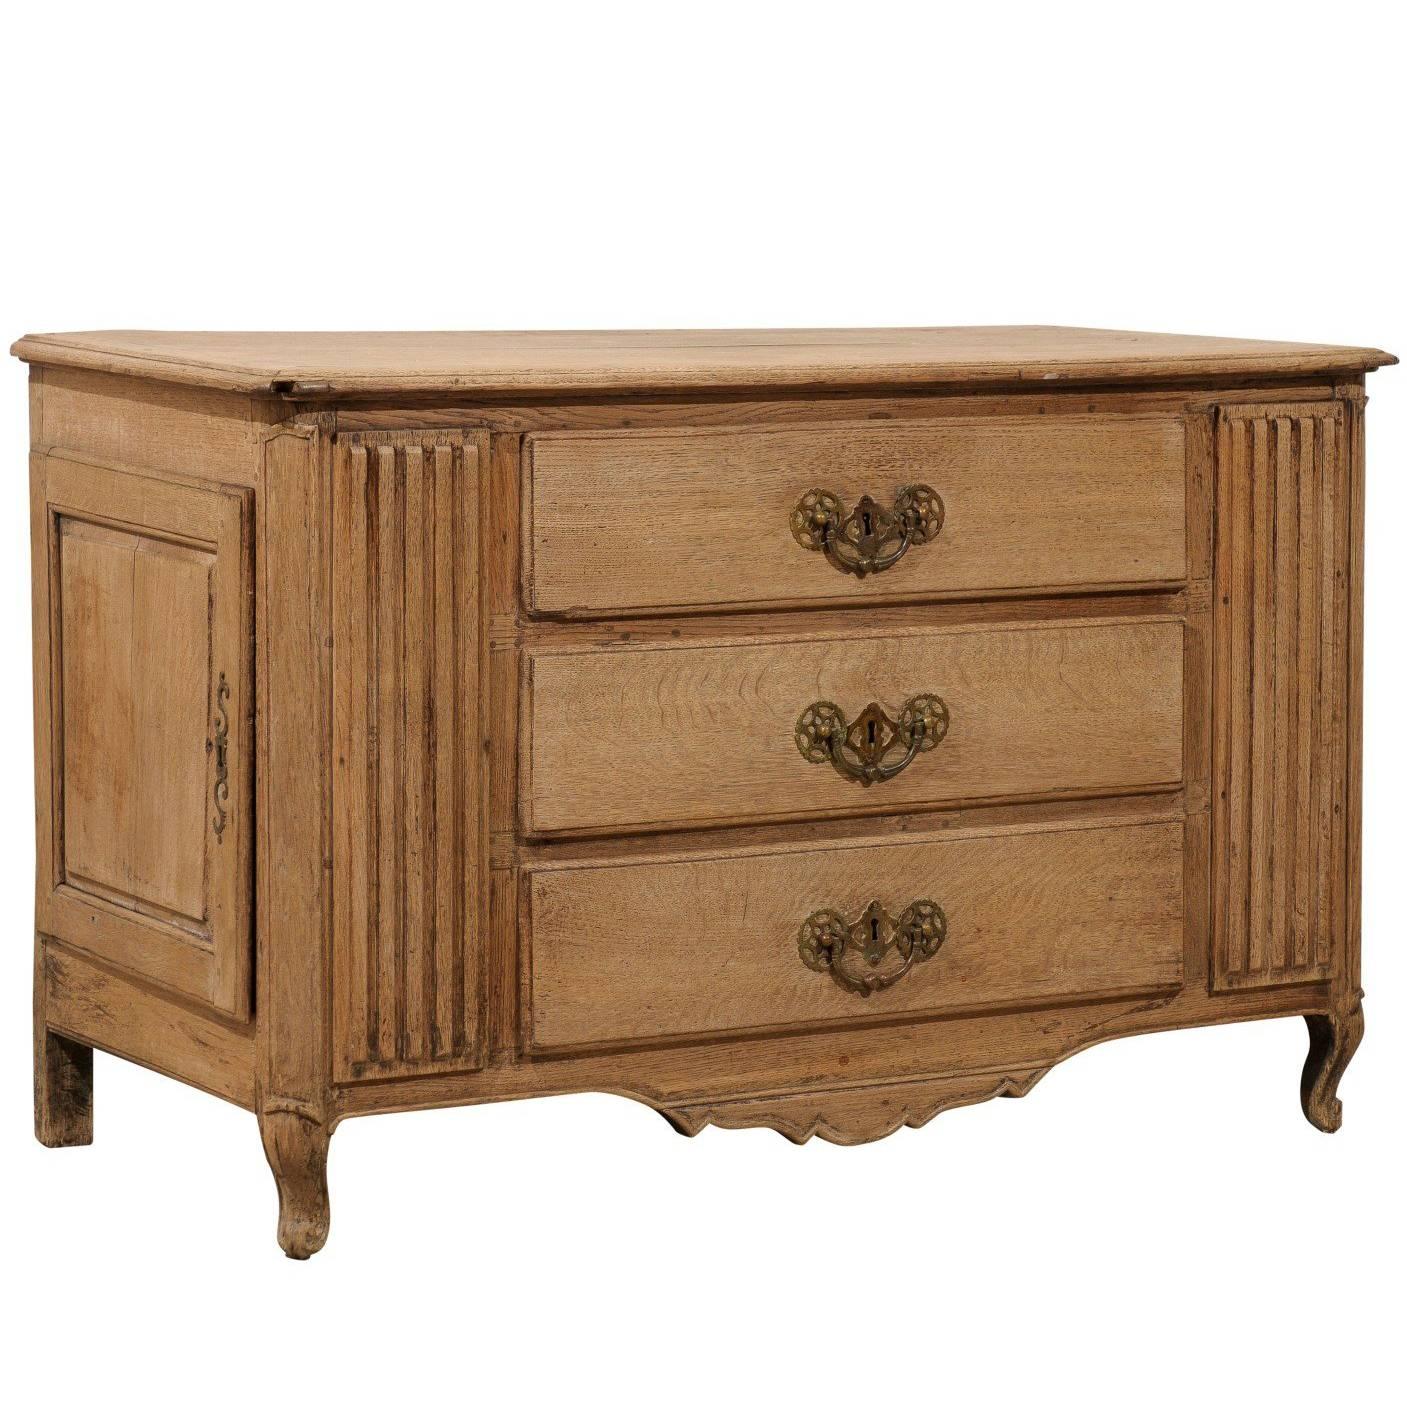 A Very Unique French 18th C. Chest w/ Reed Carved Accents & Side Doors w/Storage For Sale